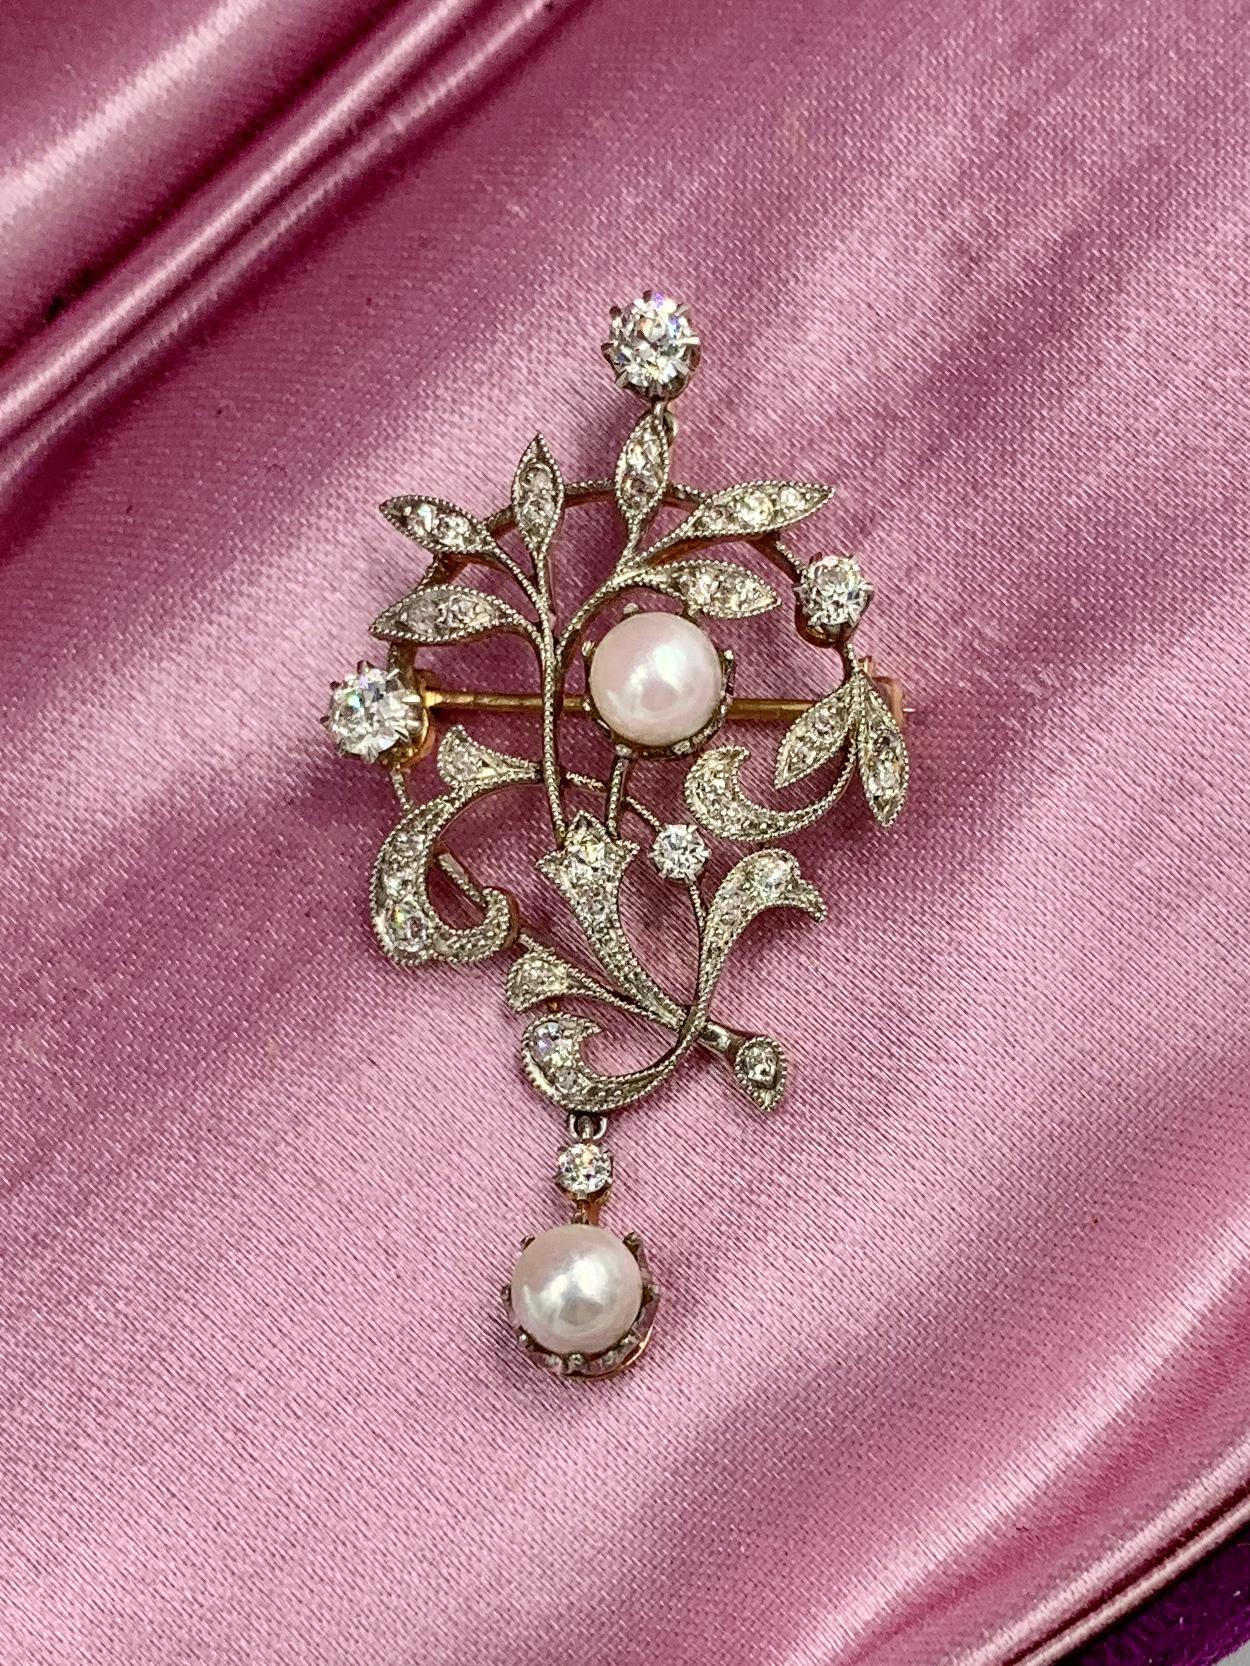 An extraordinary Edwardian - Victorian Pendant with spectacular Old Mine Cut Diamonds of incredible white color and fire, and two stunning silvery white Pearls.  The Diamonds and Pearls are set in Platinum atop 14 Karat Gold as was the custom of the